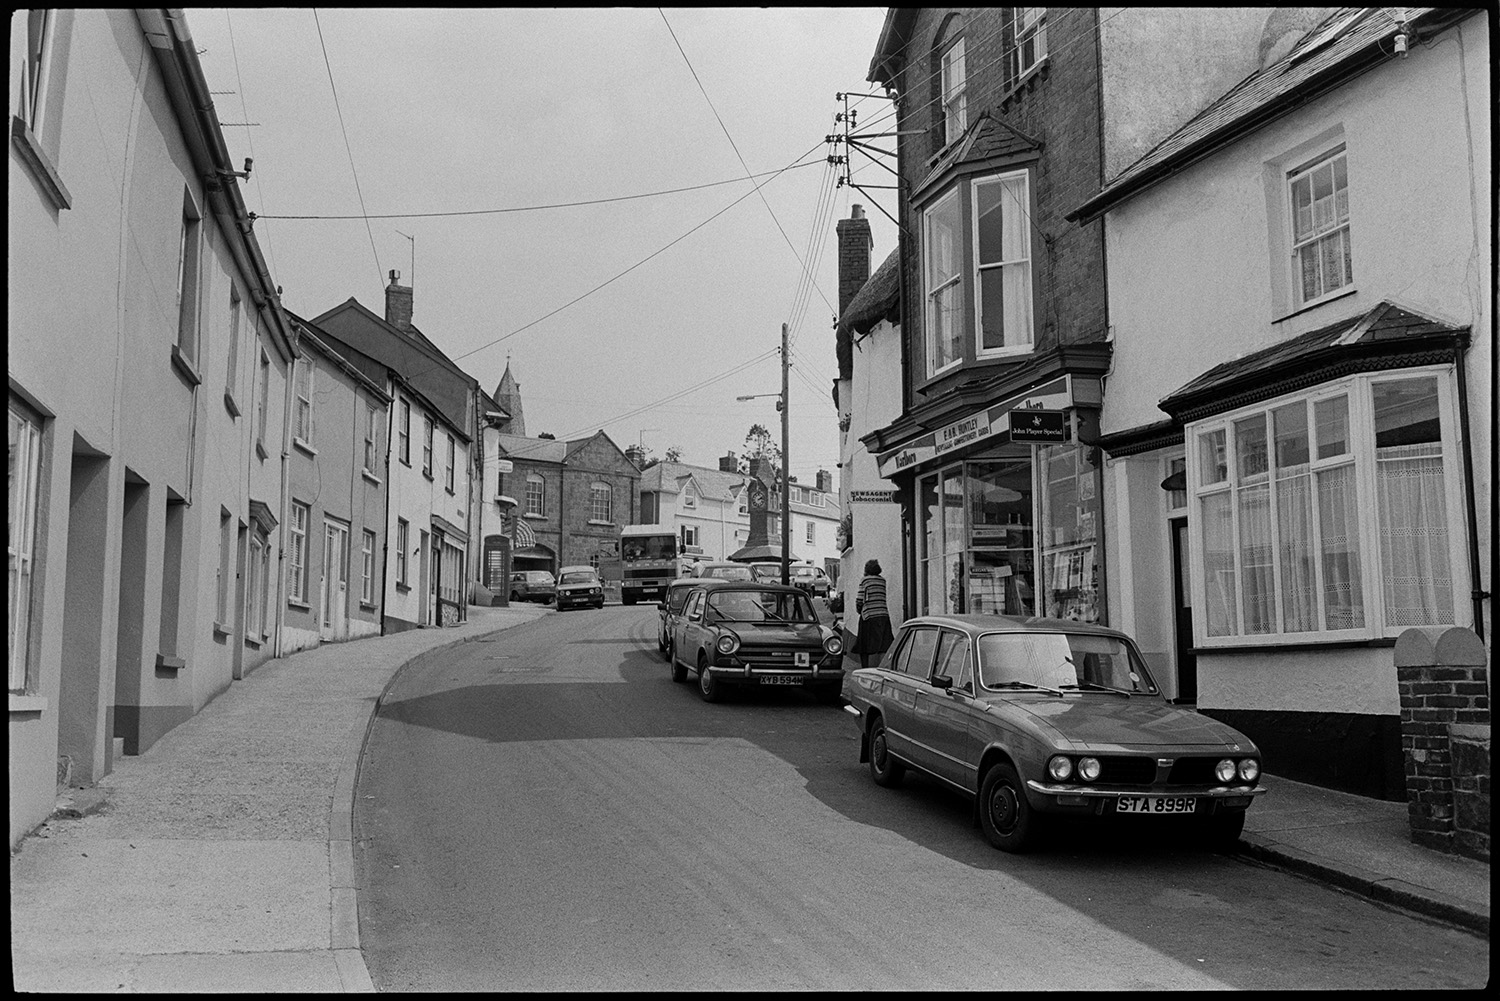 Comparison with old photo. Street scenes. Man mowing lawn. Lorries and cars.
[A street in North Tawton, looking towards the clock tower. Cars are parked outside E & B Huntley, newsagents shop front.]